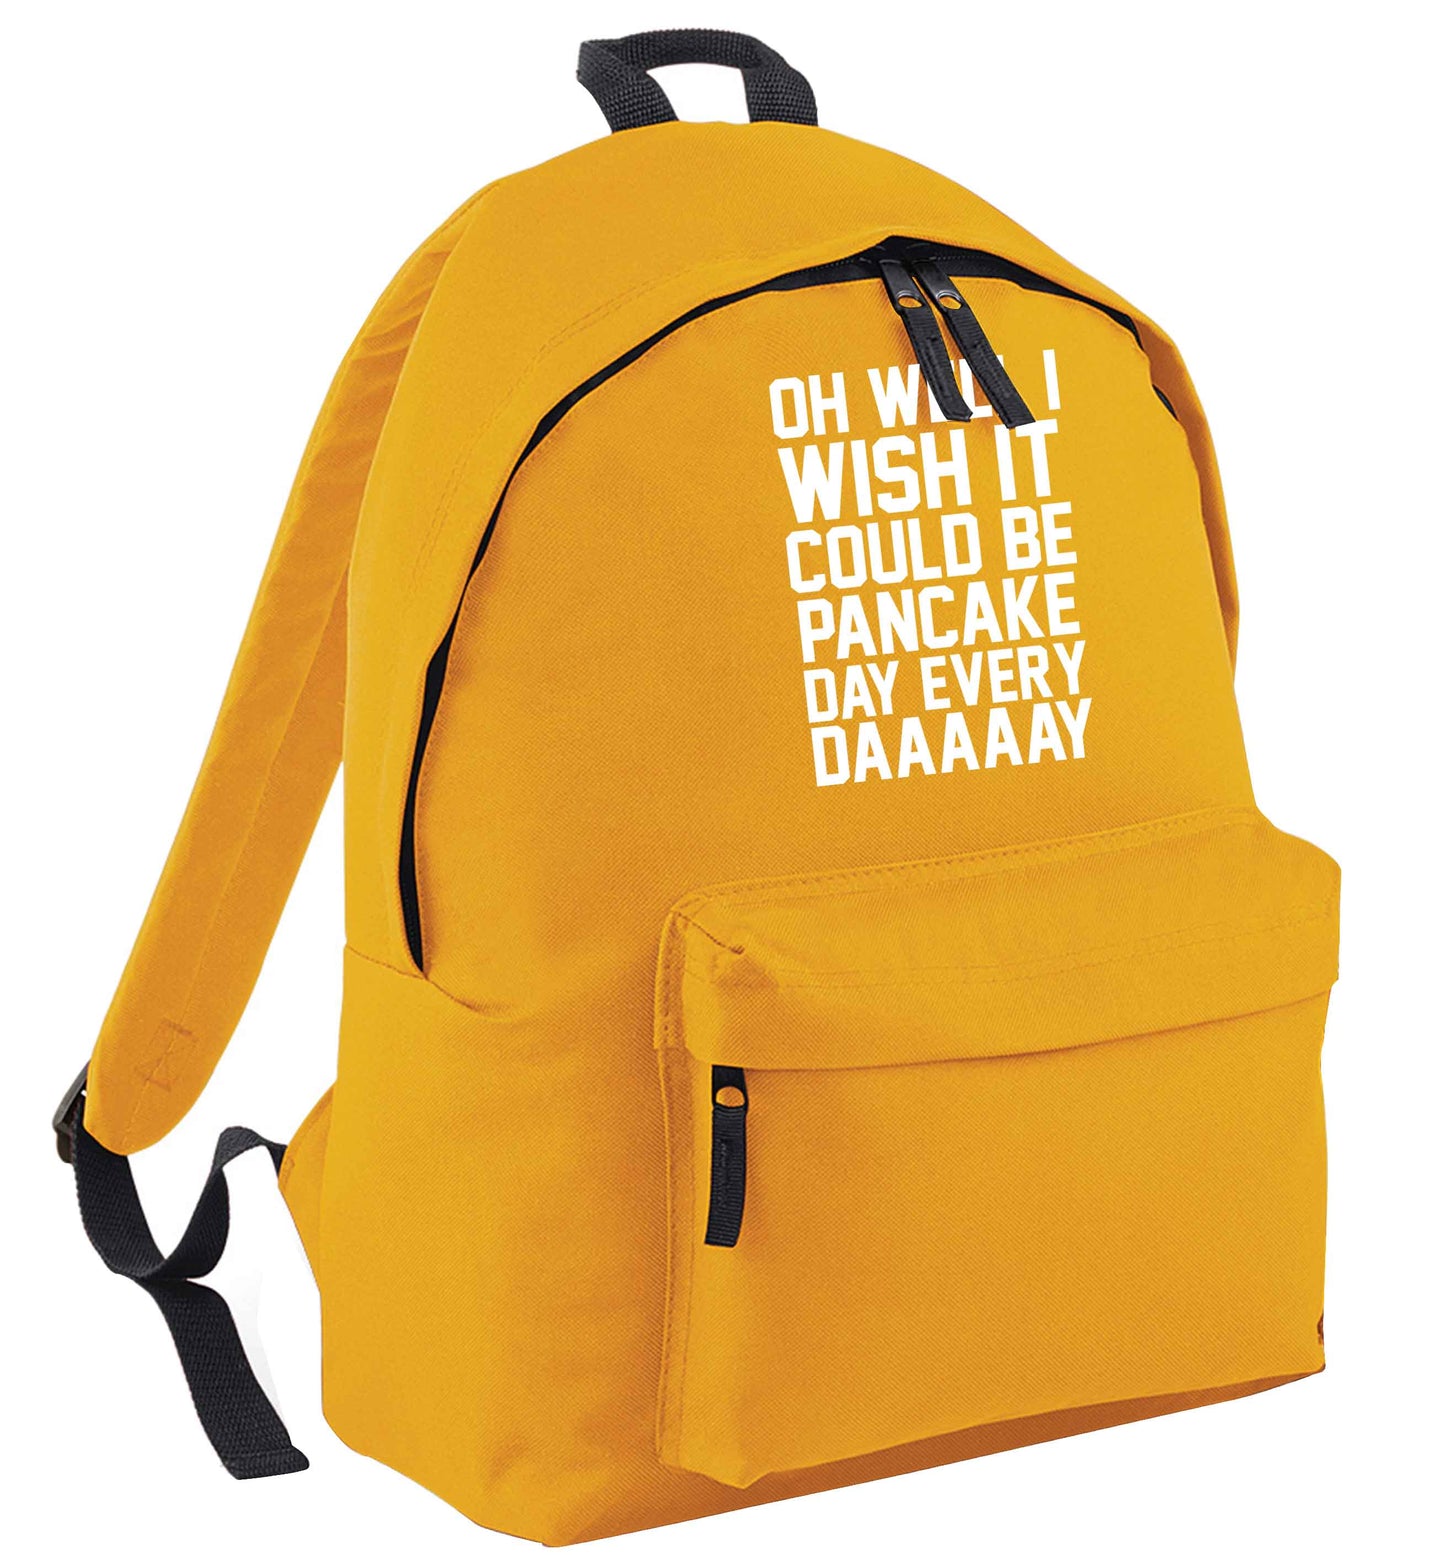 Oh well I wish it could be pancake day every day mustard adults backpack